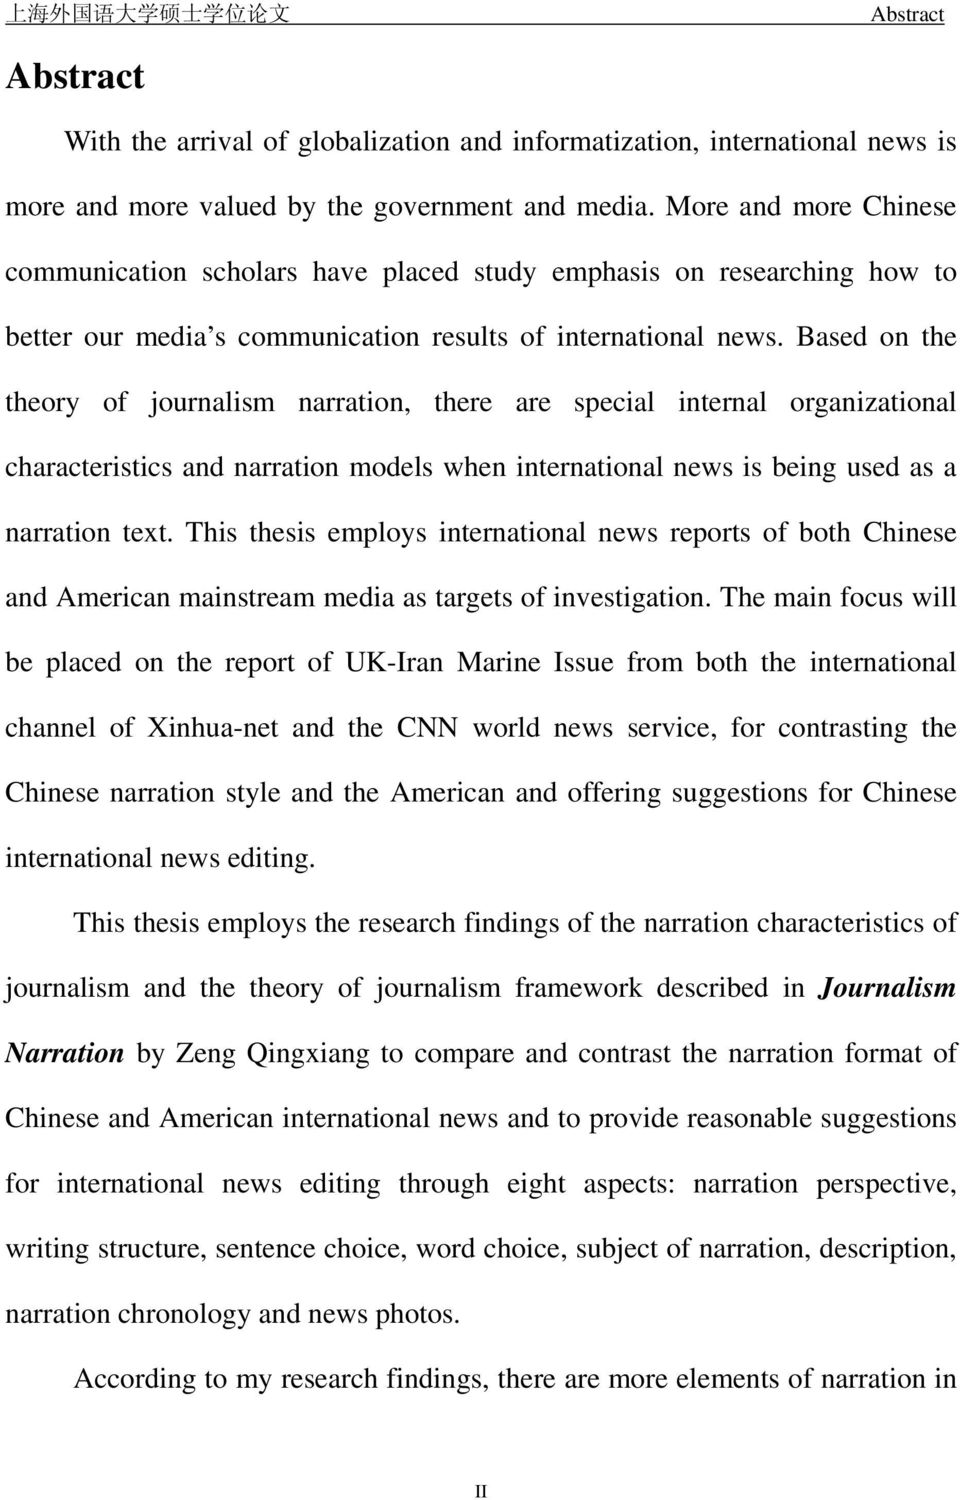 Based on the theory of journalism narration, there are special internal organizational characteristics and narration models when international news is being used as a narration text.